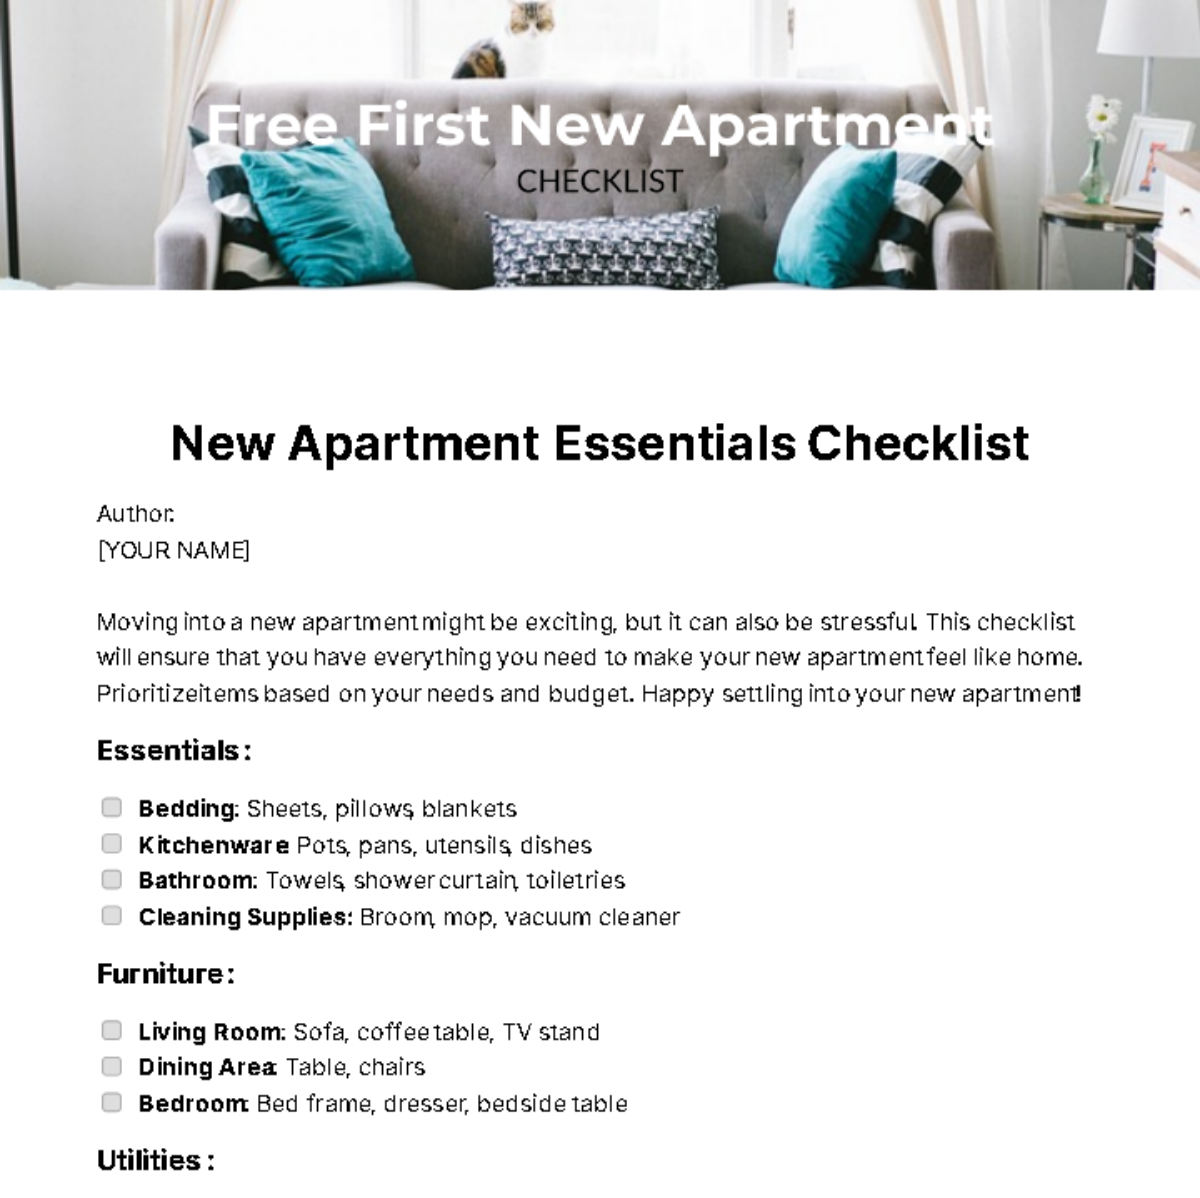 Free First New Apartment Checklist Template